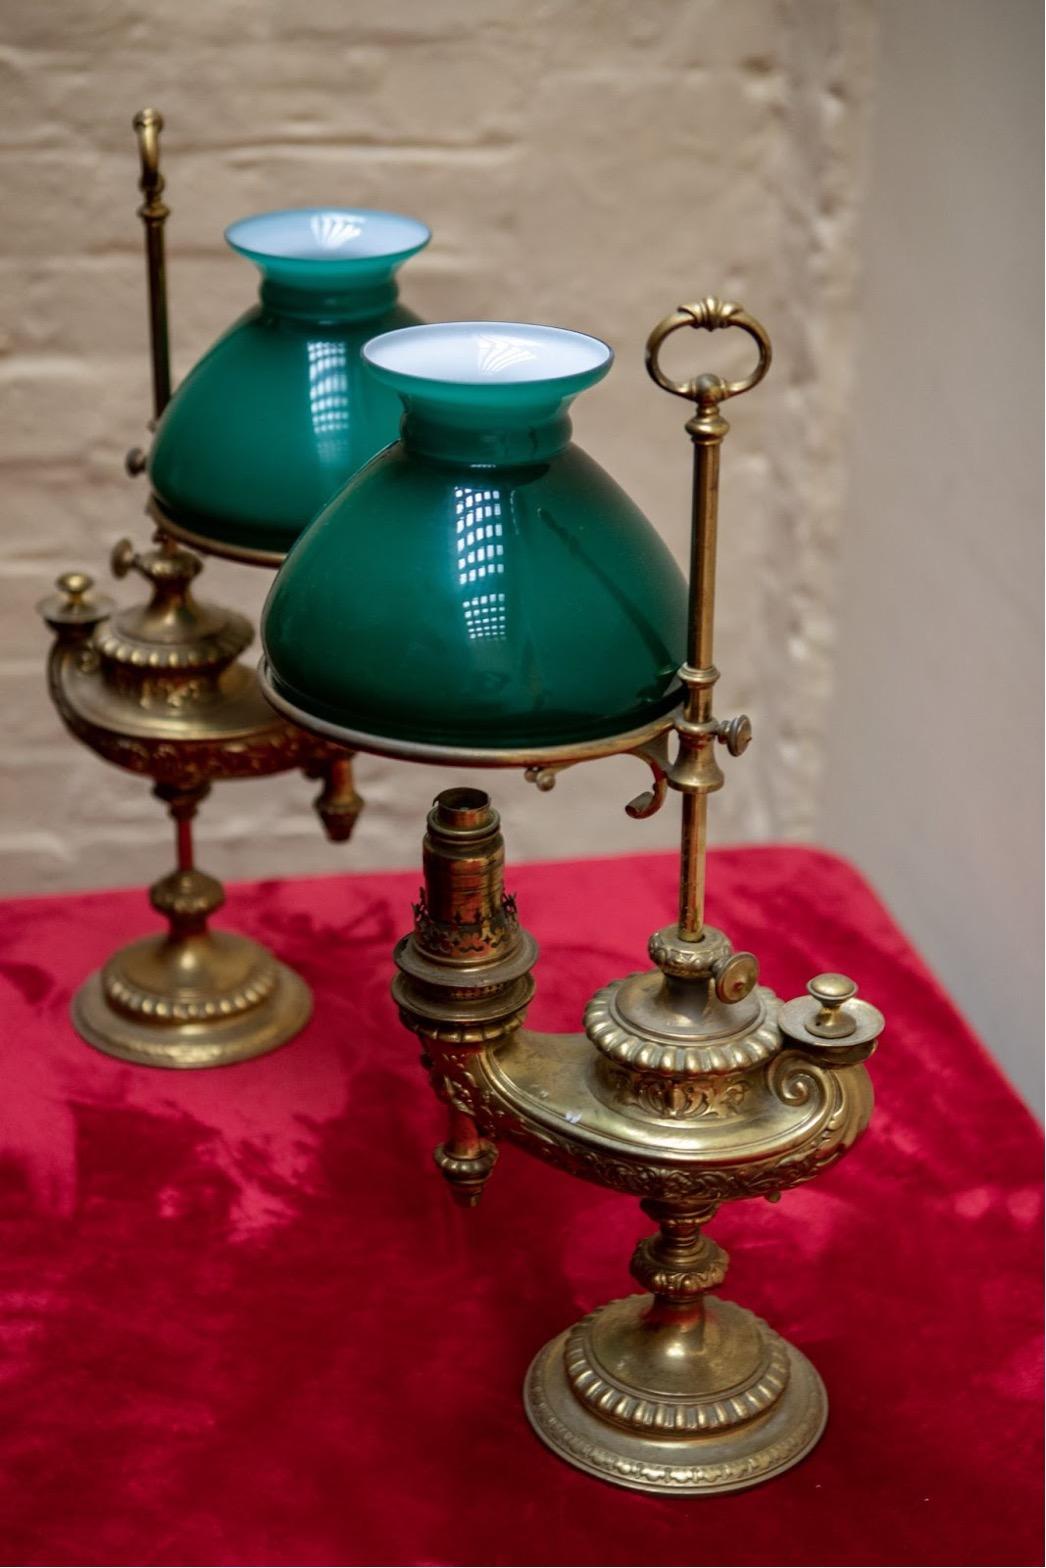 Pair of Wild & Wessel student lamps, sometimes known as Aladdin lamps or Harvard lamps. Made in Berlin, Germany, circa 1870. The lamps will be re-wired and PAT tested as part of the price once destination country is known. 